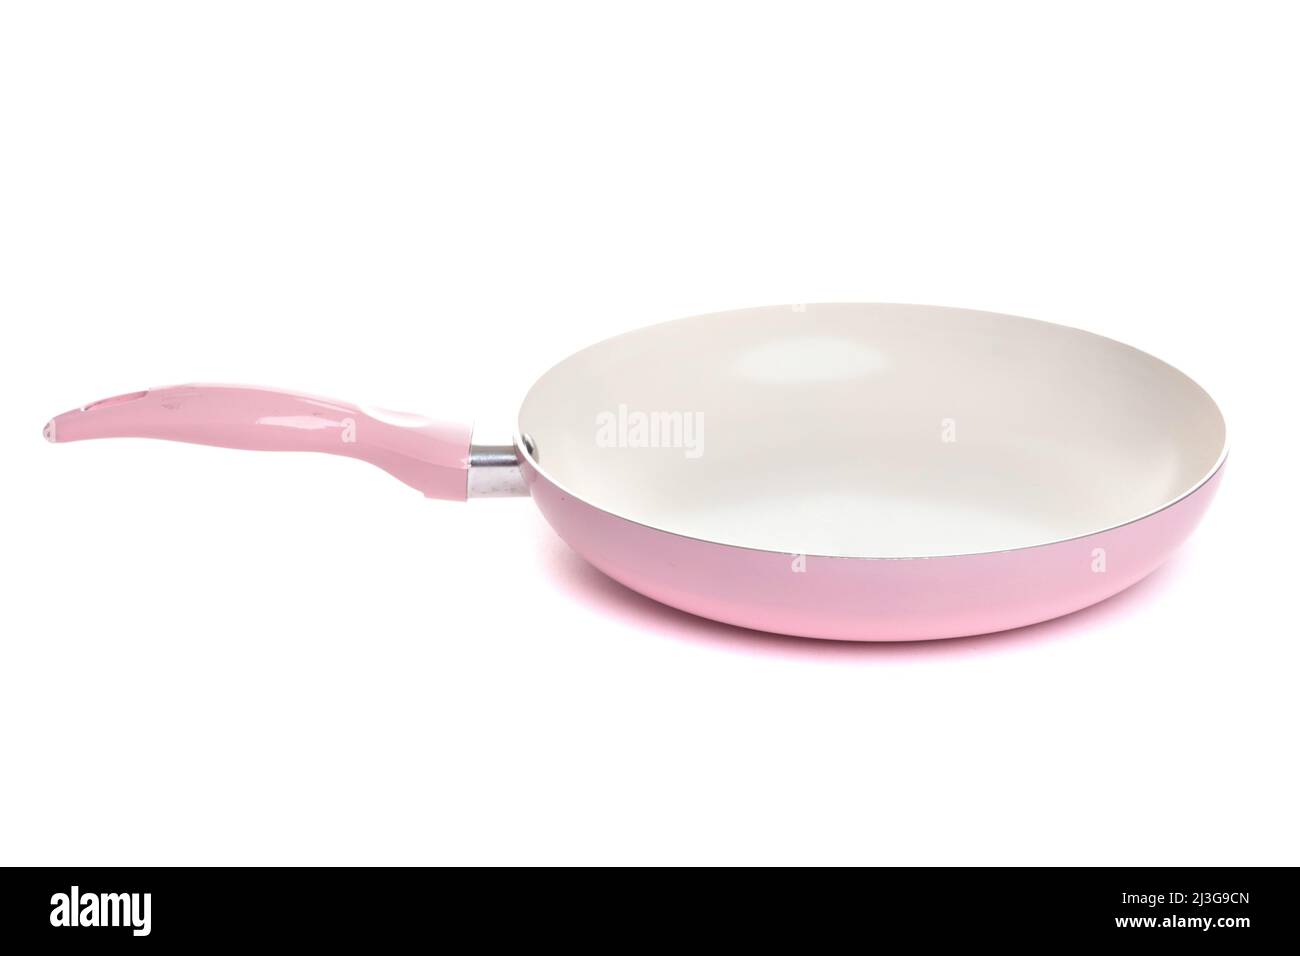 https://c8.alamy.com/comp/2J3G9CN/frying-pan-of-pink-color-with-white-non-stick-coating-on-an-isolated-background-2J3G9CN.jpg